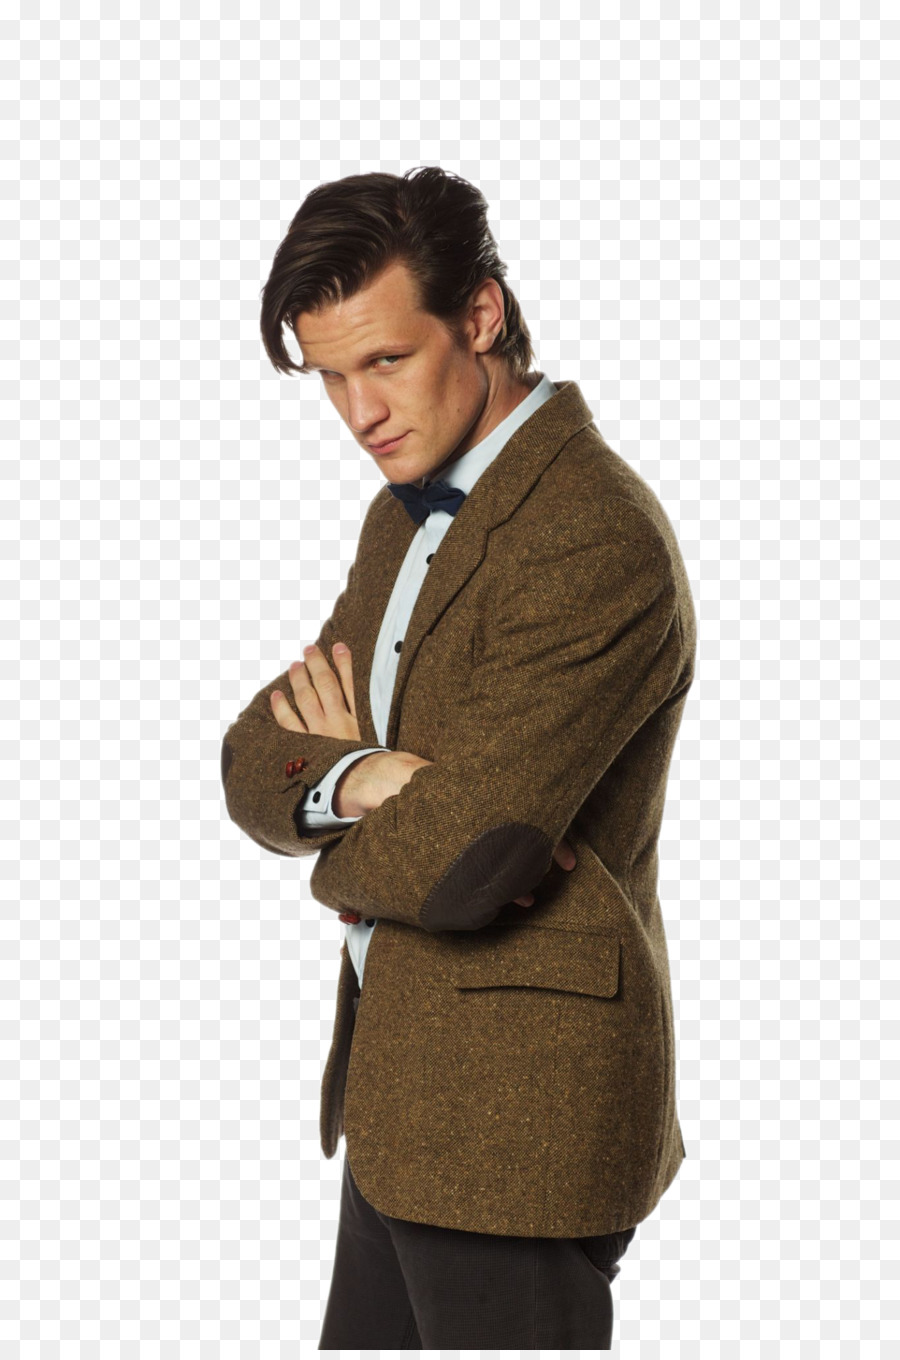 Matt Smith Eleventh Doctor Doctor Who Tenth Doctor - Doctor png download - 900*1350 - Free Transparent Matt Smith png Download.